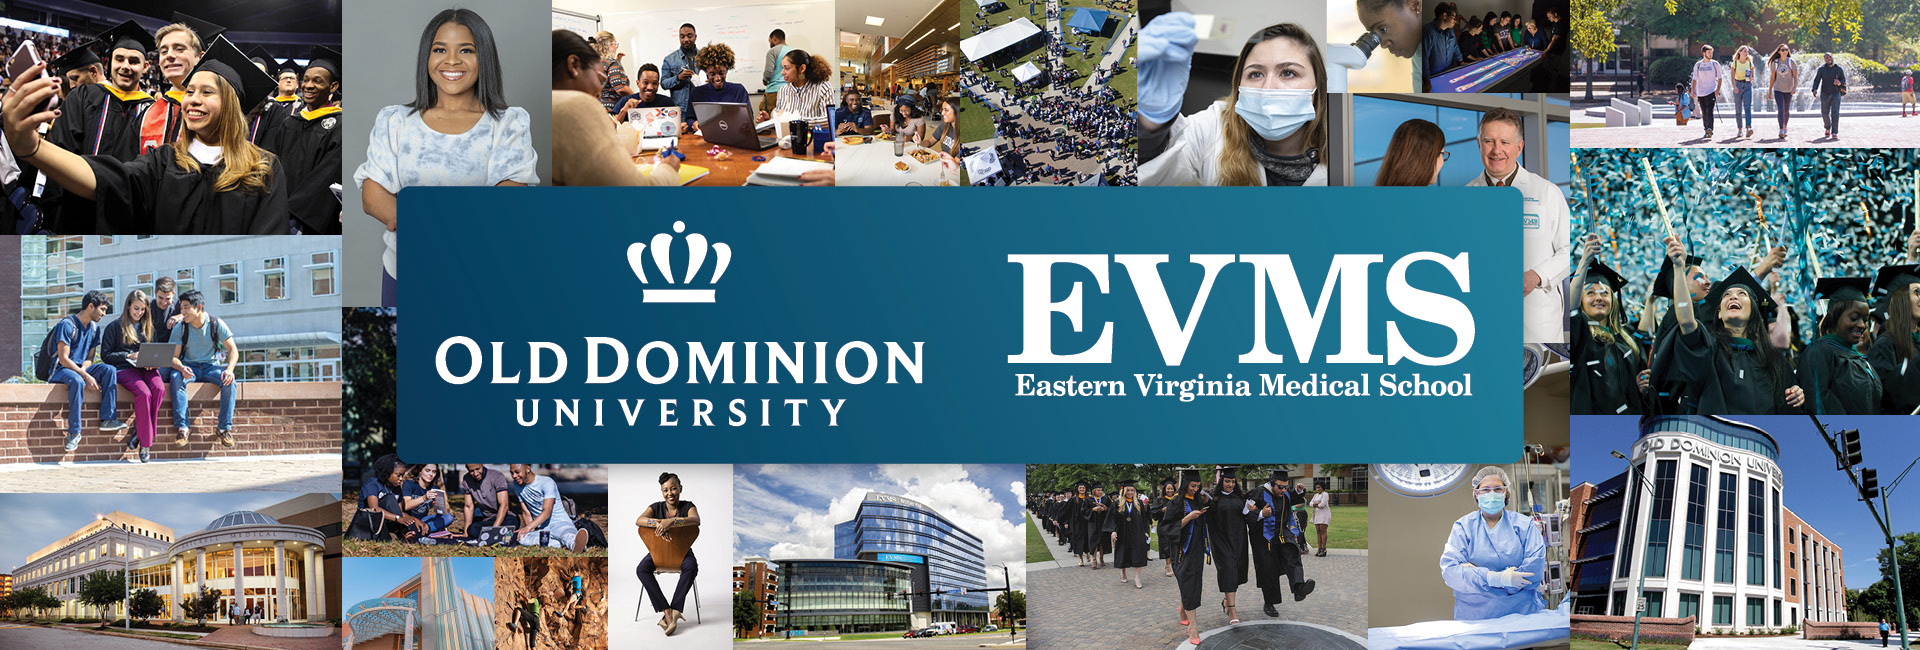 Collage of images of campus life at EVMS and ODU with institutional logos